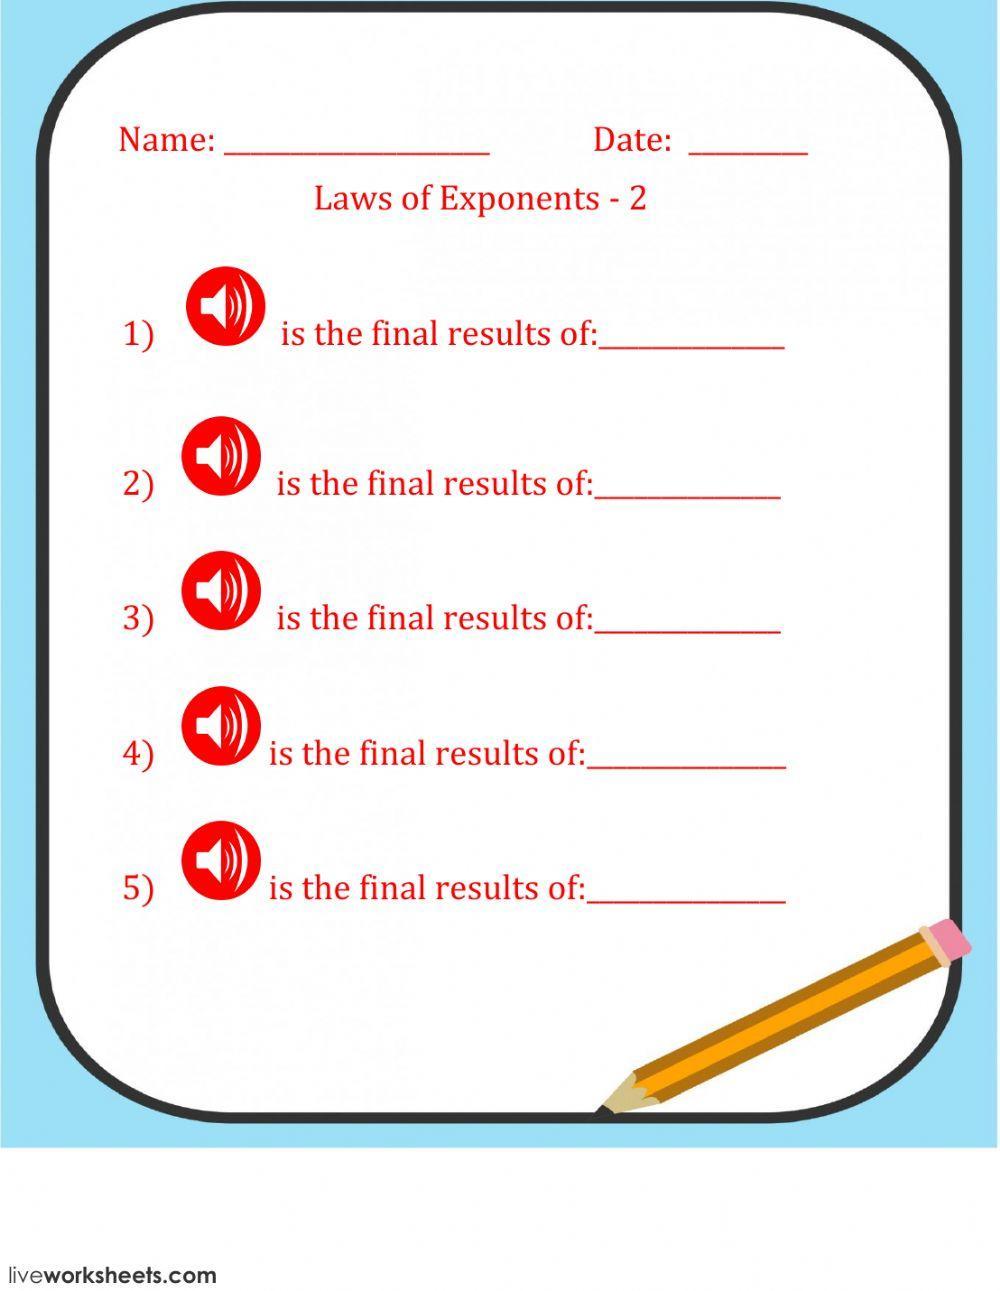 Laws of Exponents - 2